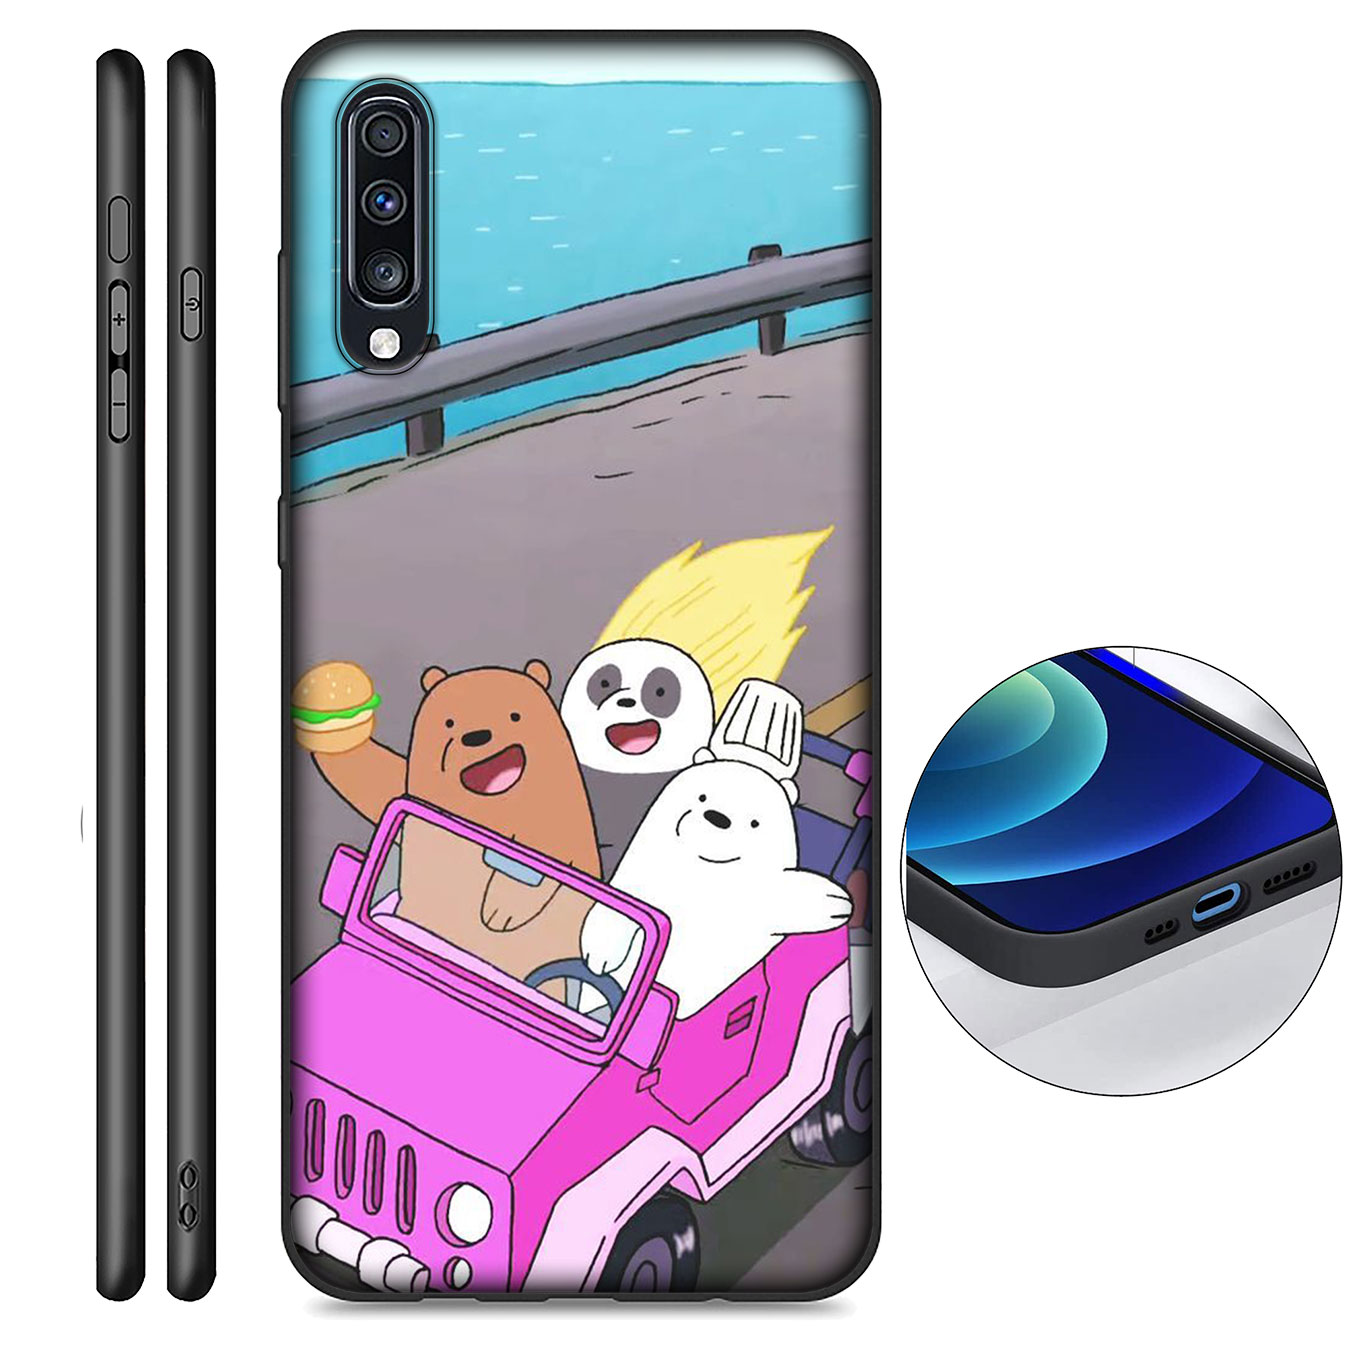 Samsung Galaxy Note 20 Ultra Note 10 Plus  Lite 8 9 S7 Edge M11 Phone Case Soft Silicone Casing Anime We Bare Bears